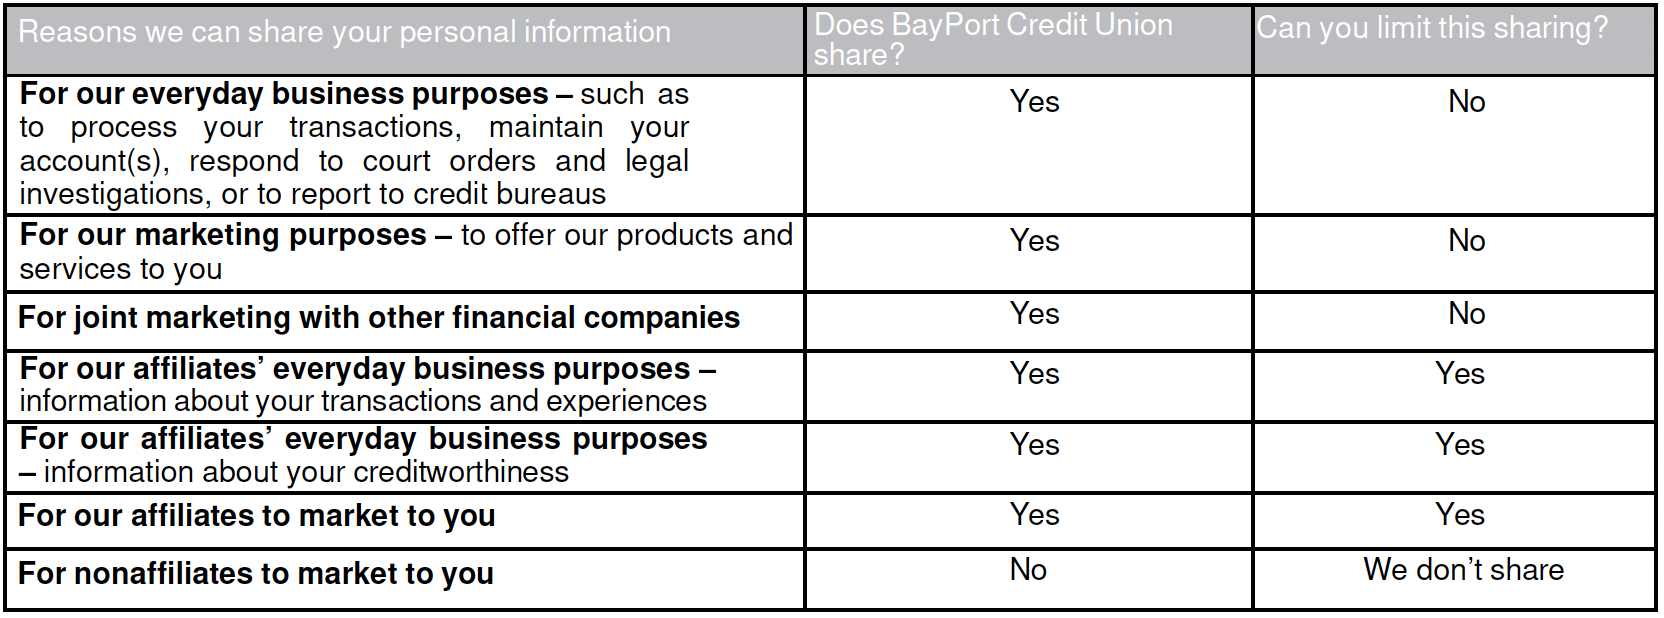 reasons why BayPort can share personal information